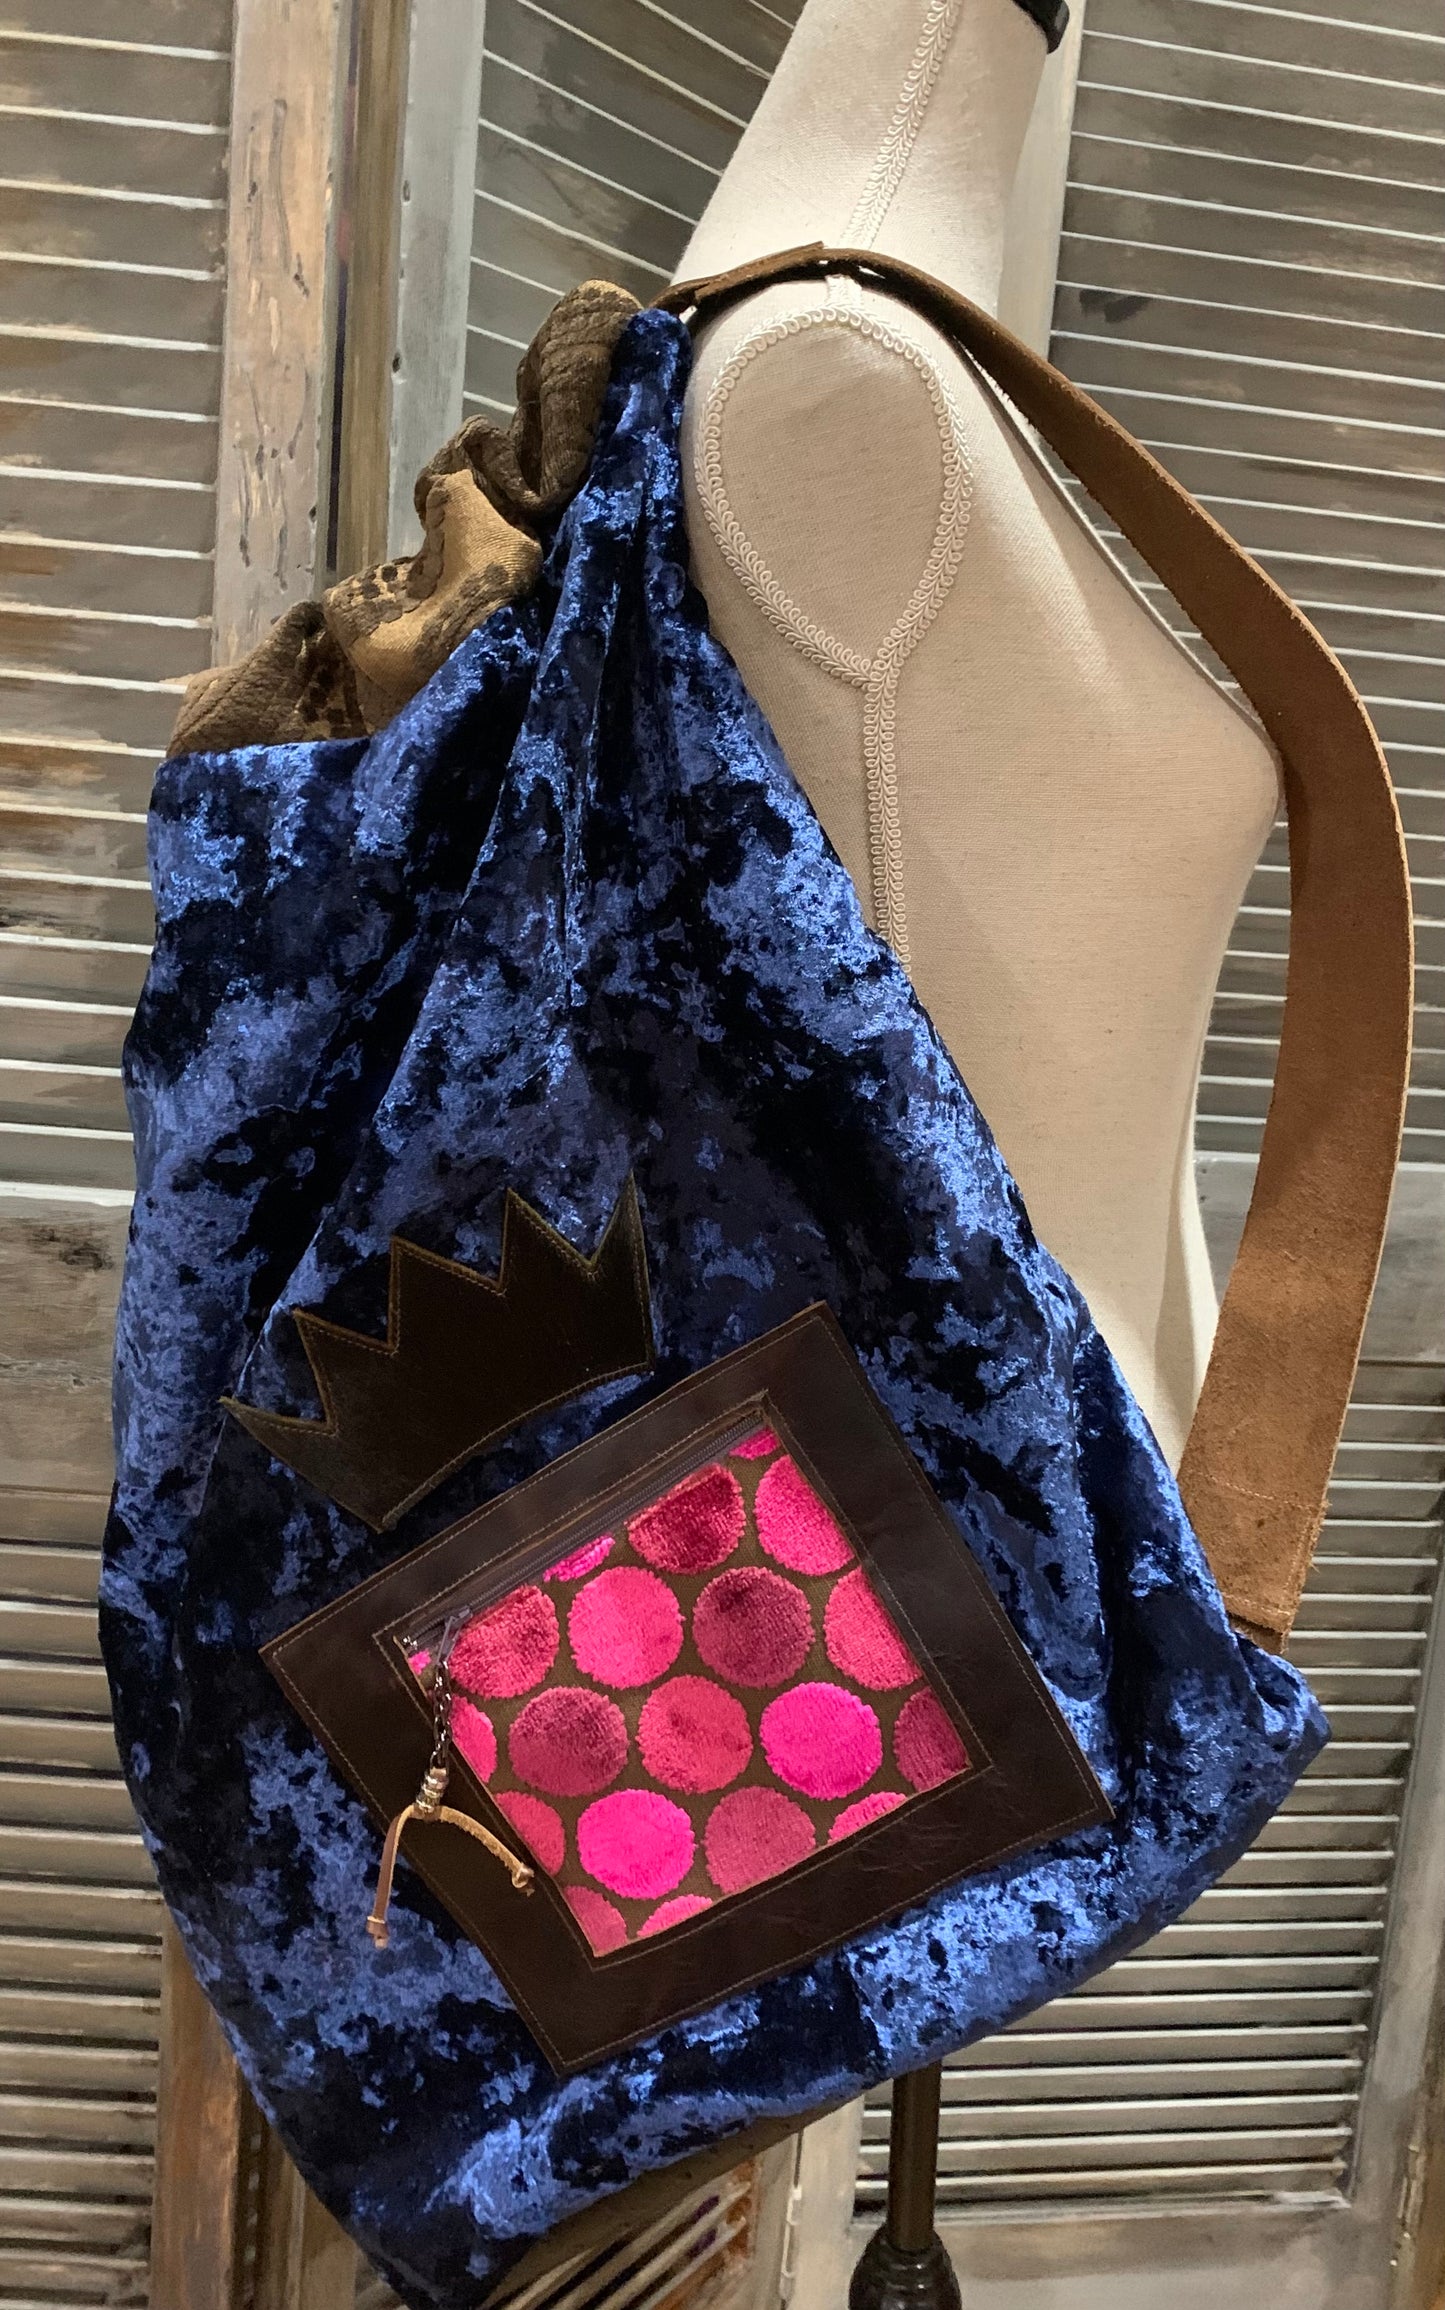 Pillow Bag-Blue Crush Couture Velvet with Tiger Chenille - DMD Bags